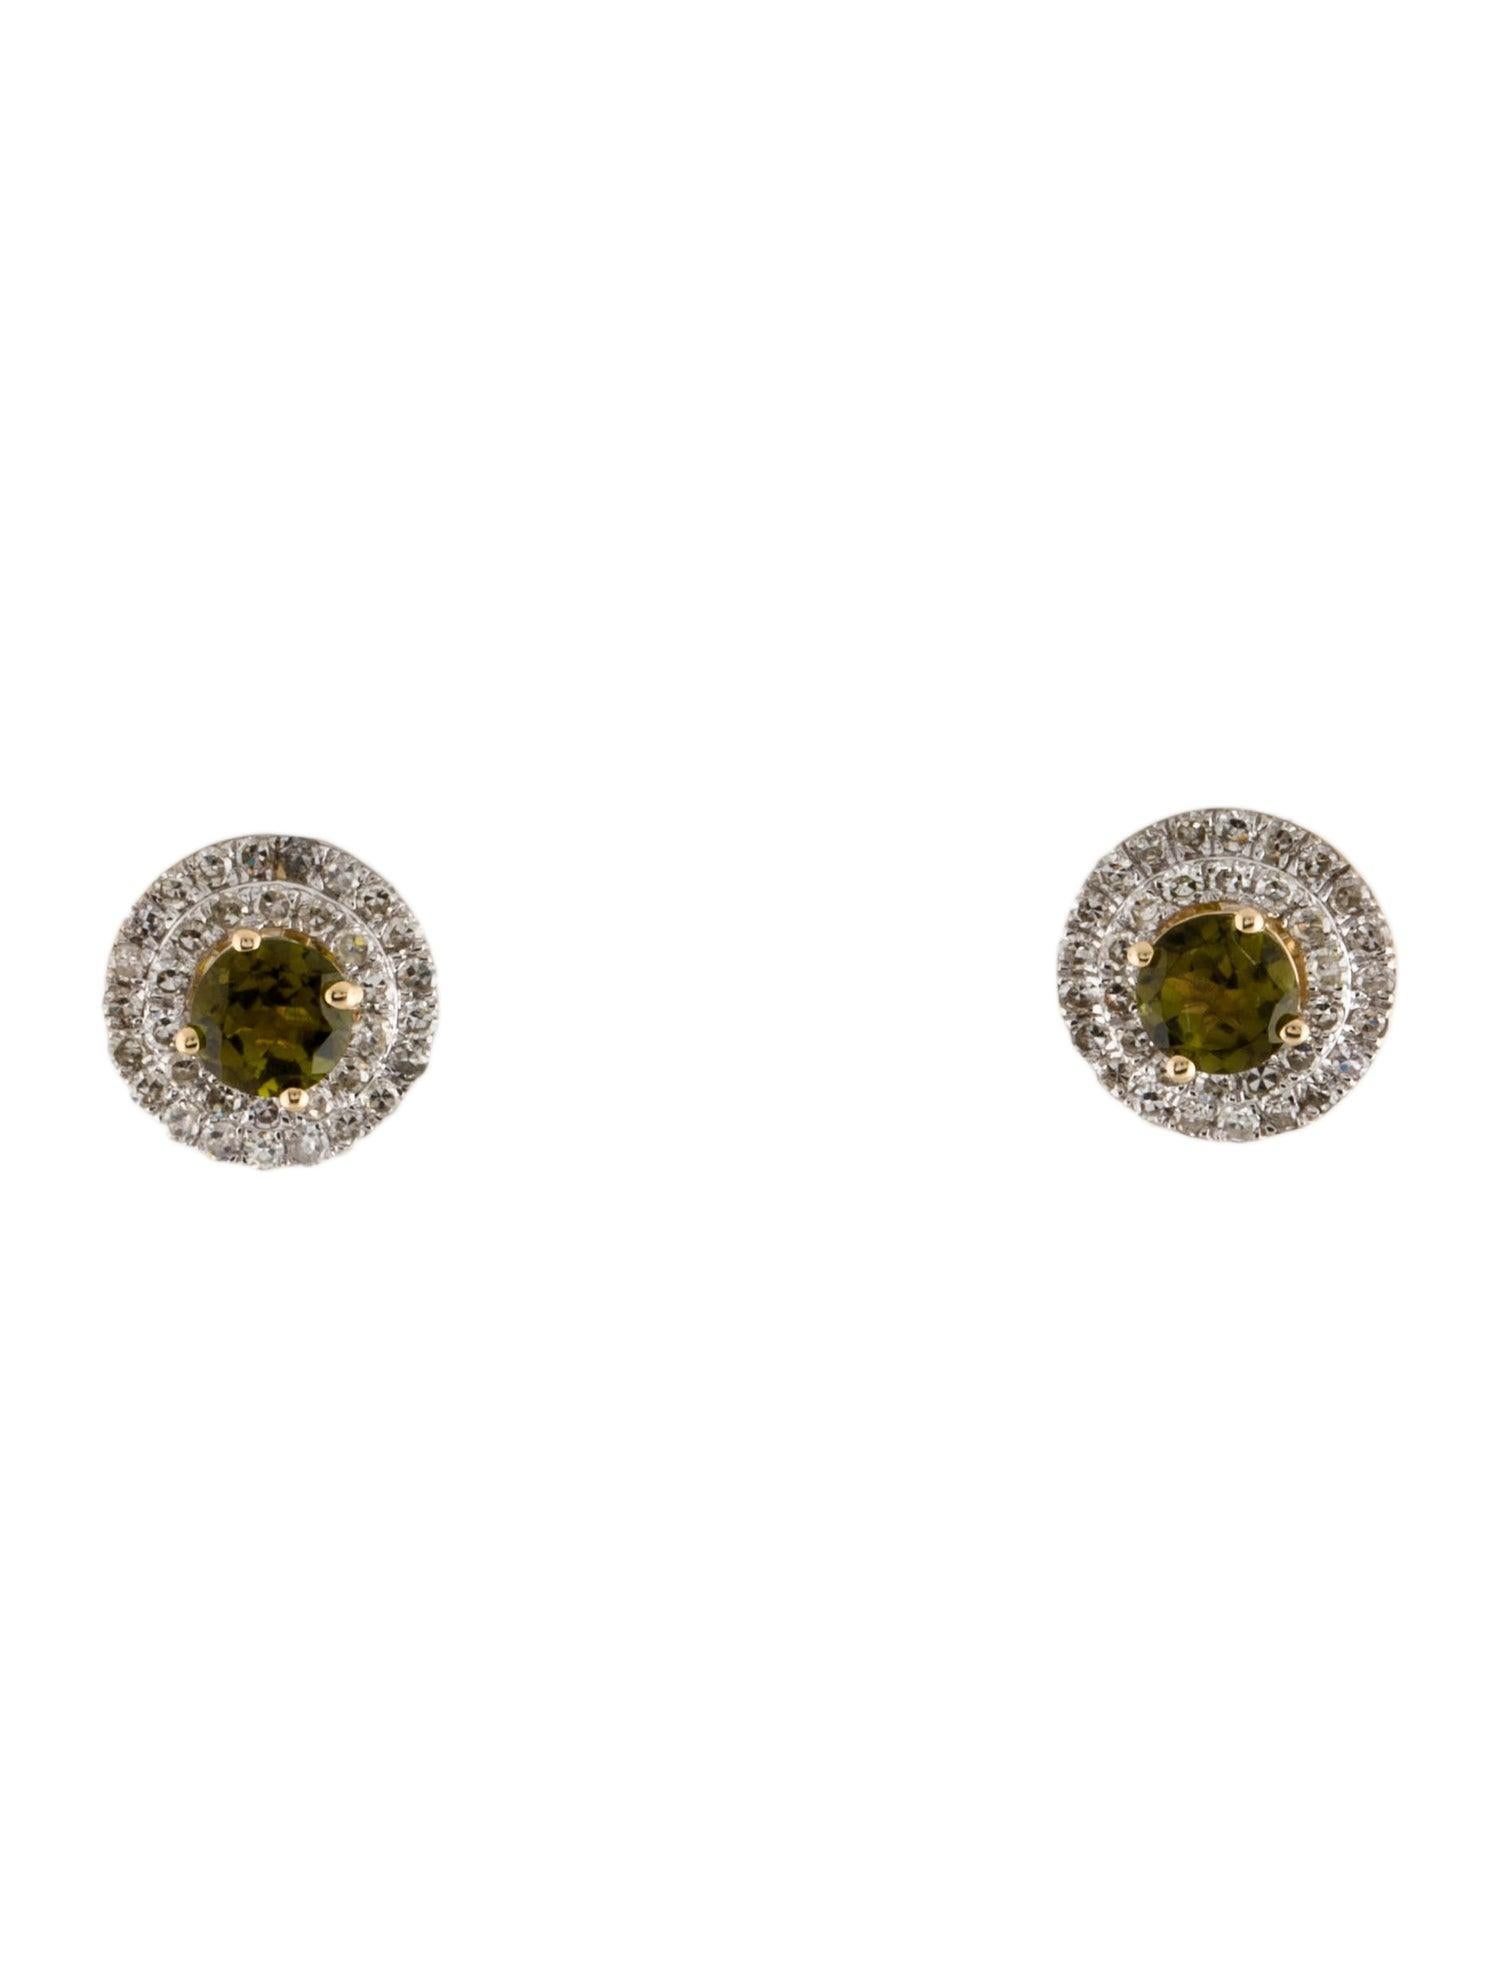 14K Tourmaline & Diamond Stud Earrings - Timeless Exquisite Gemstone Jewelry In New Condition For Sale In Holtsville, NY